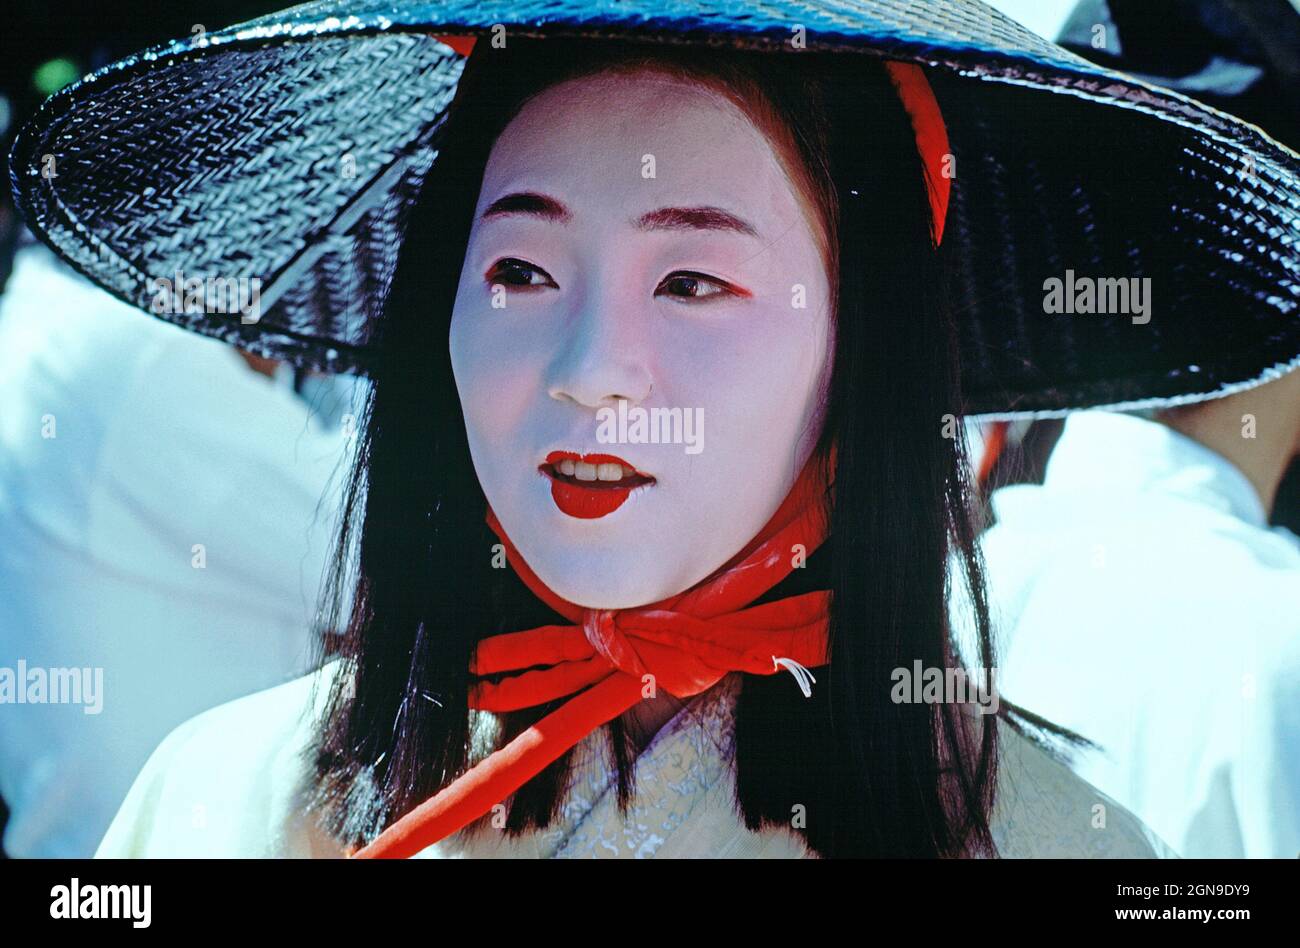 Japan. Kyoto. Imperial Palace. Woman in Heian period costume with traditional white face makeup. Stock Photo